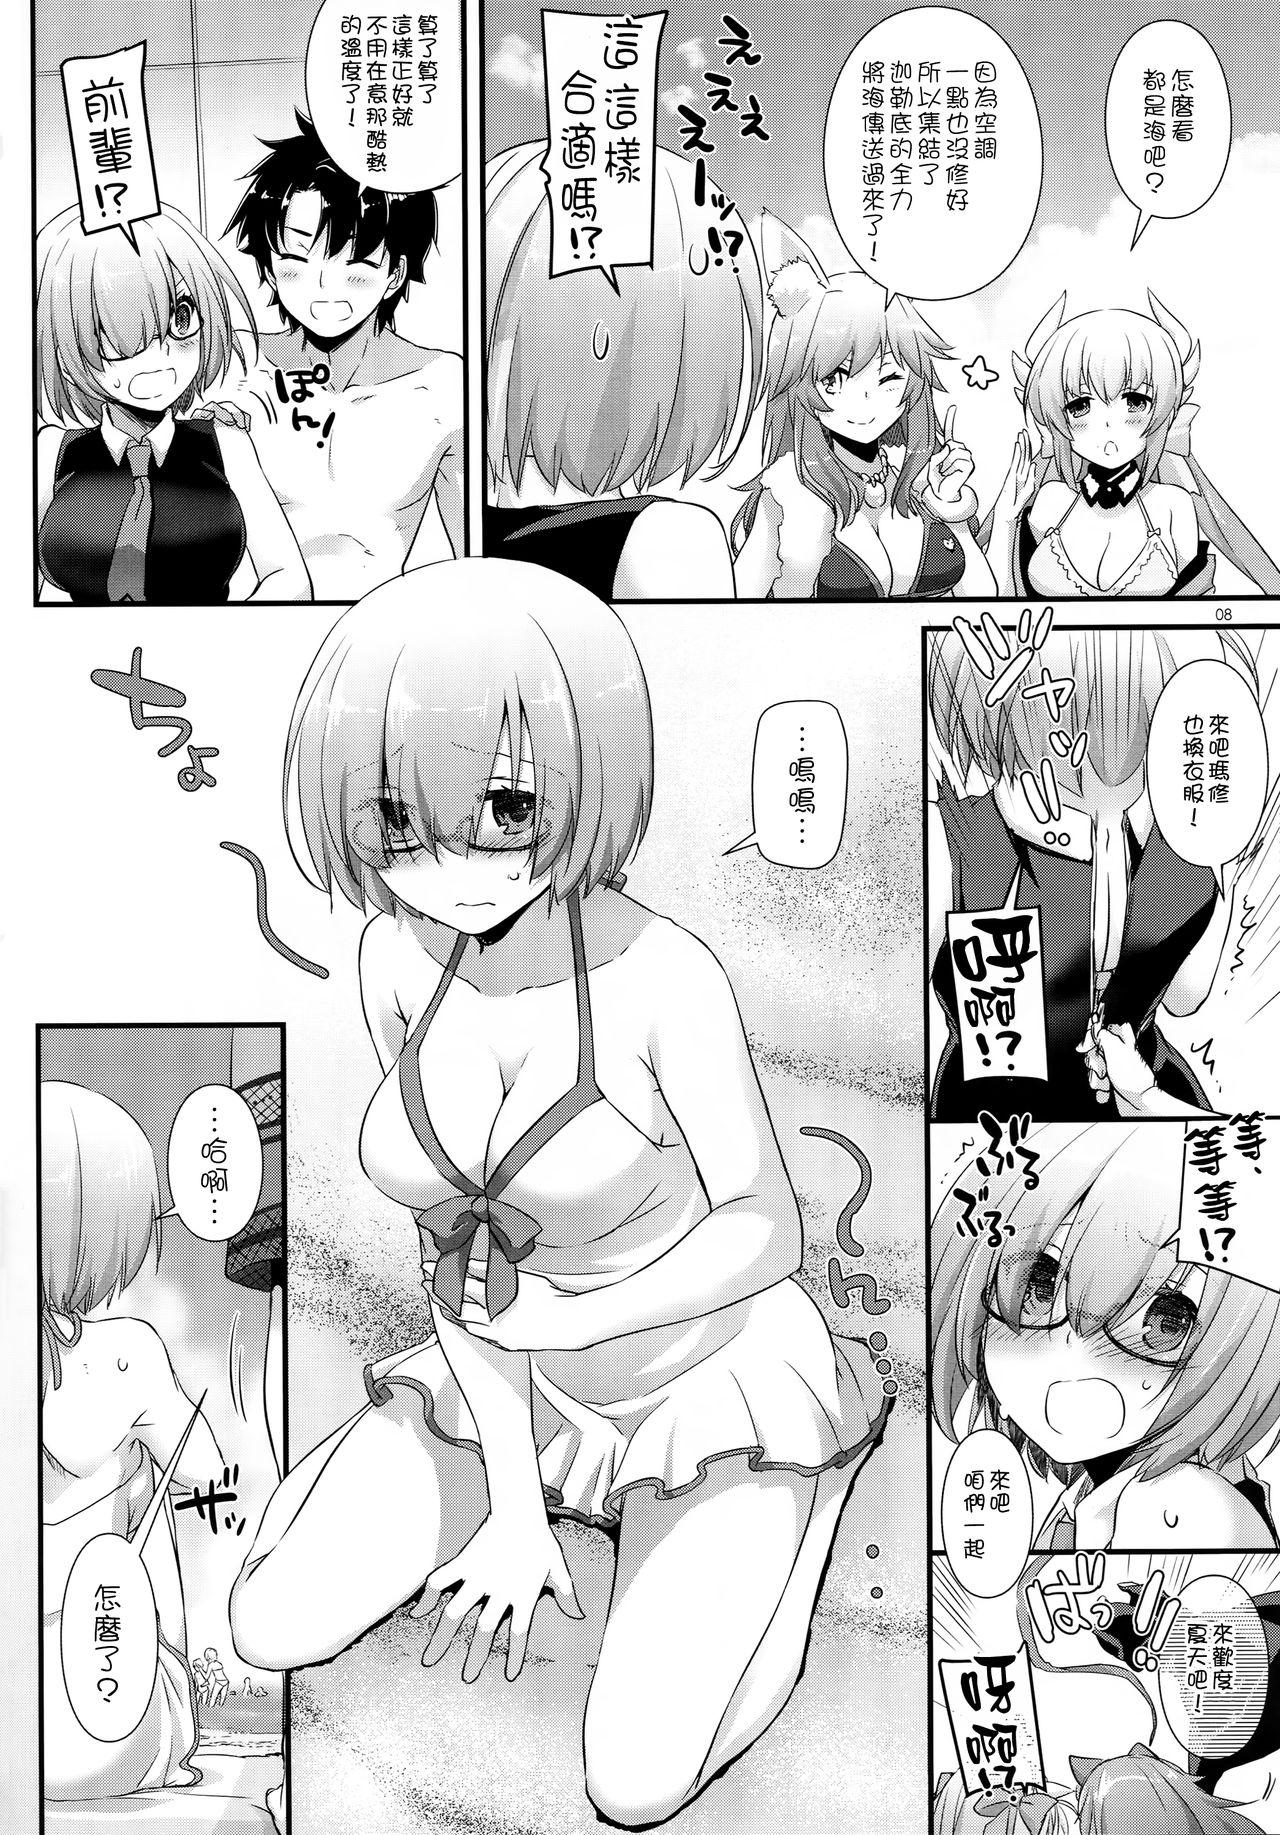 Ex Girlfriends D.L. action 116 - Fate grand order Tiny Titties - Page 8